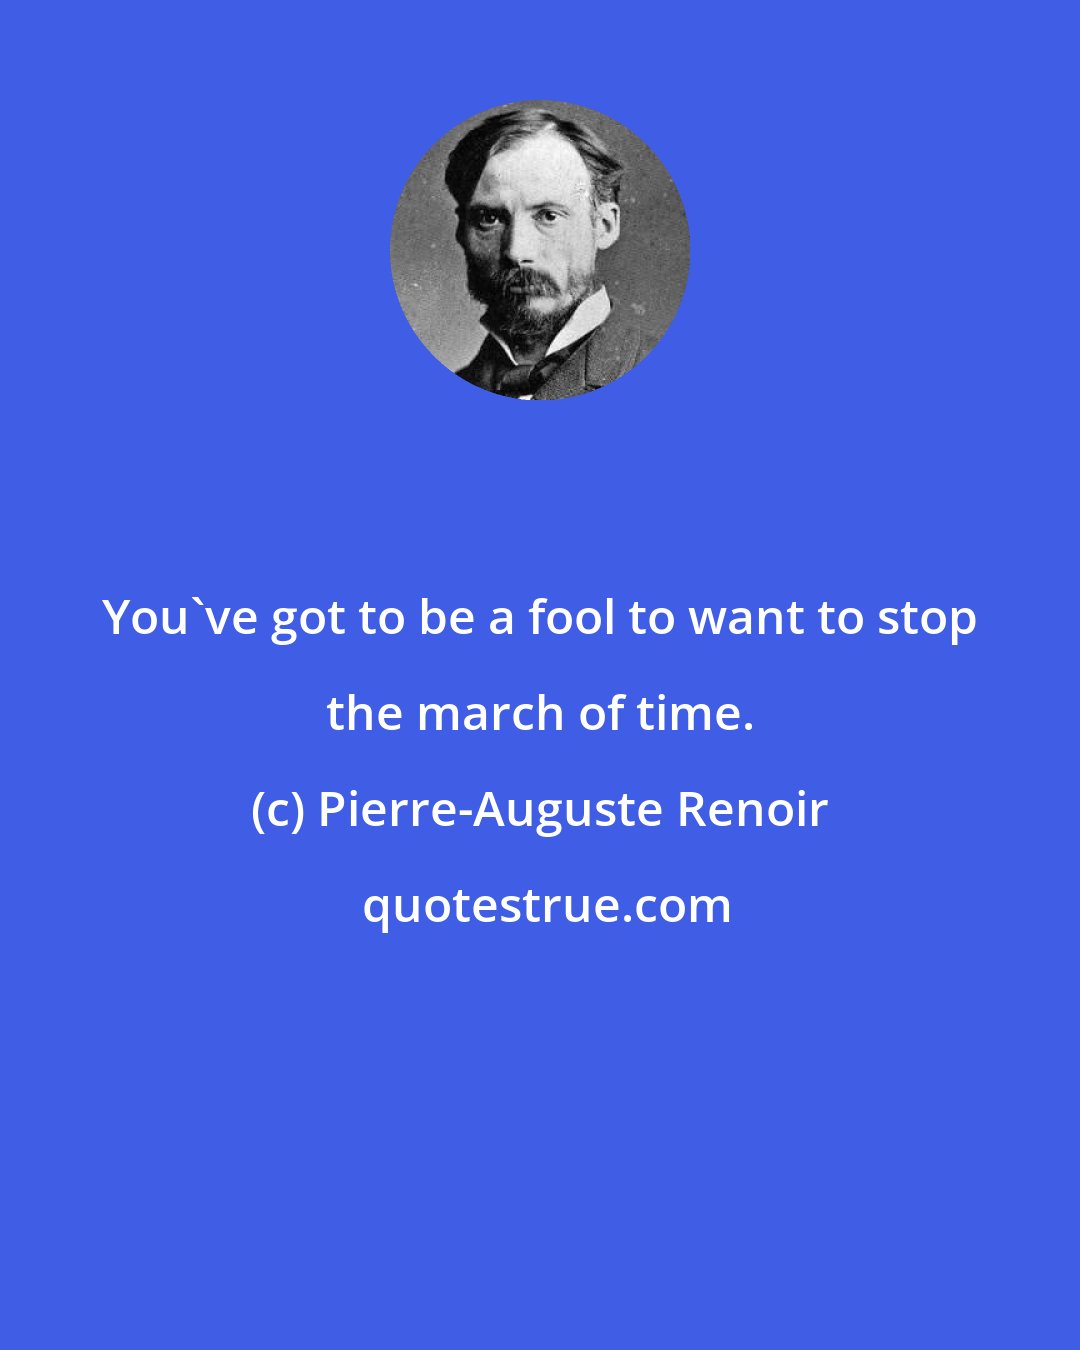 Pierre-Auguste Renoir: You've got to be a fool to want to stop the march of time.